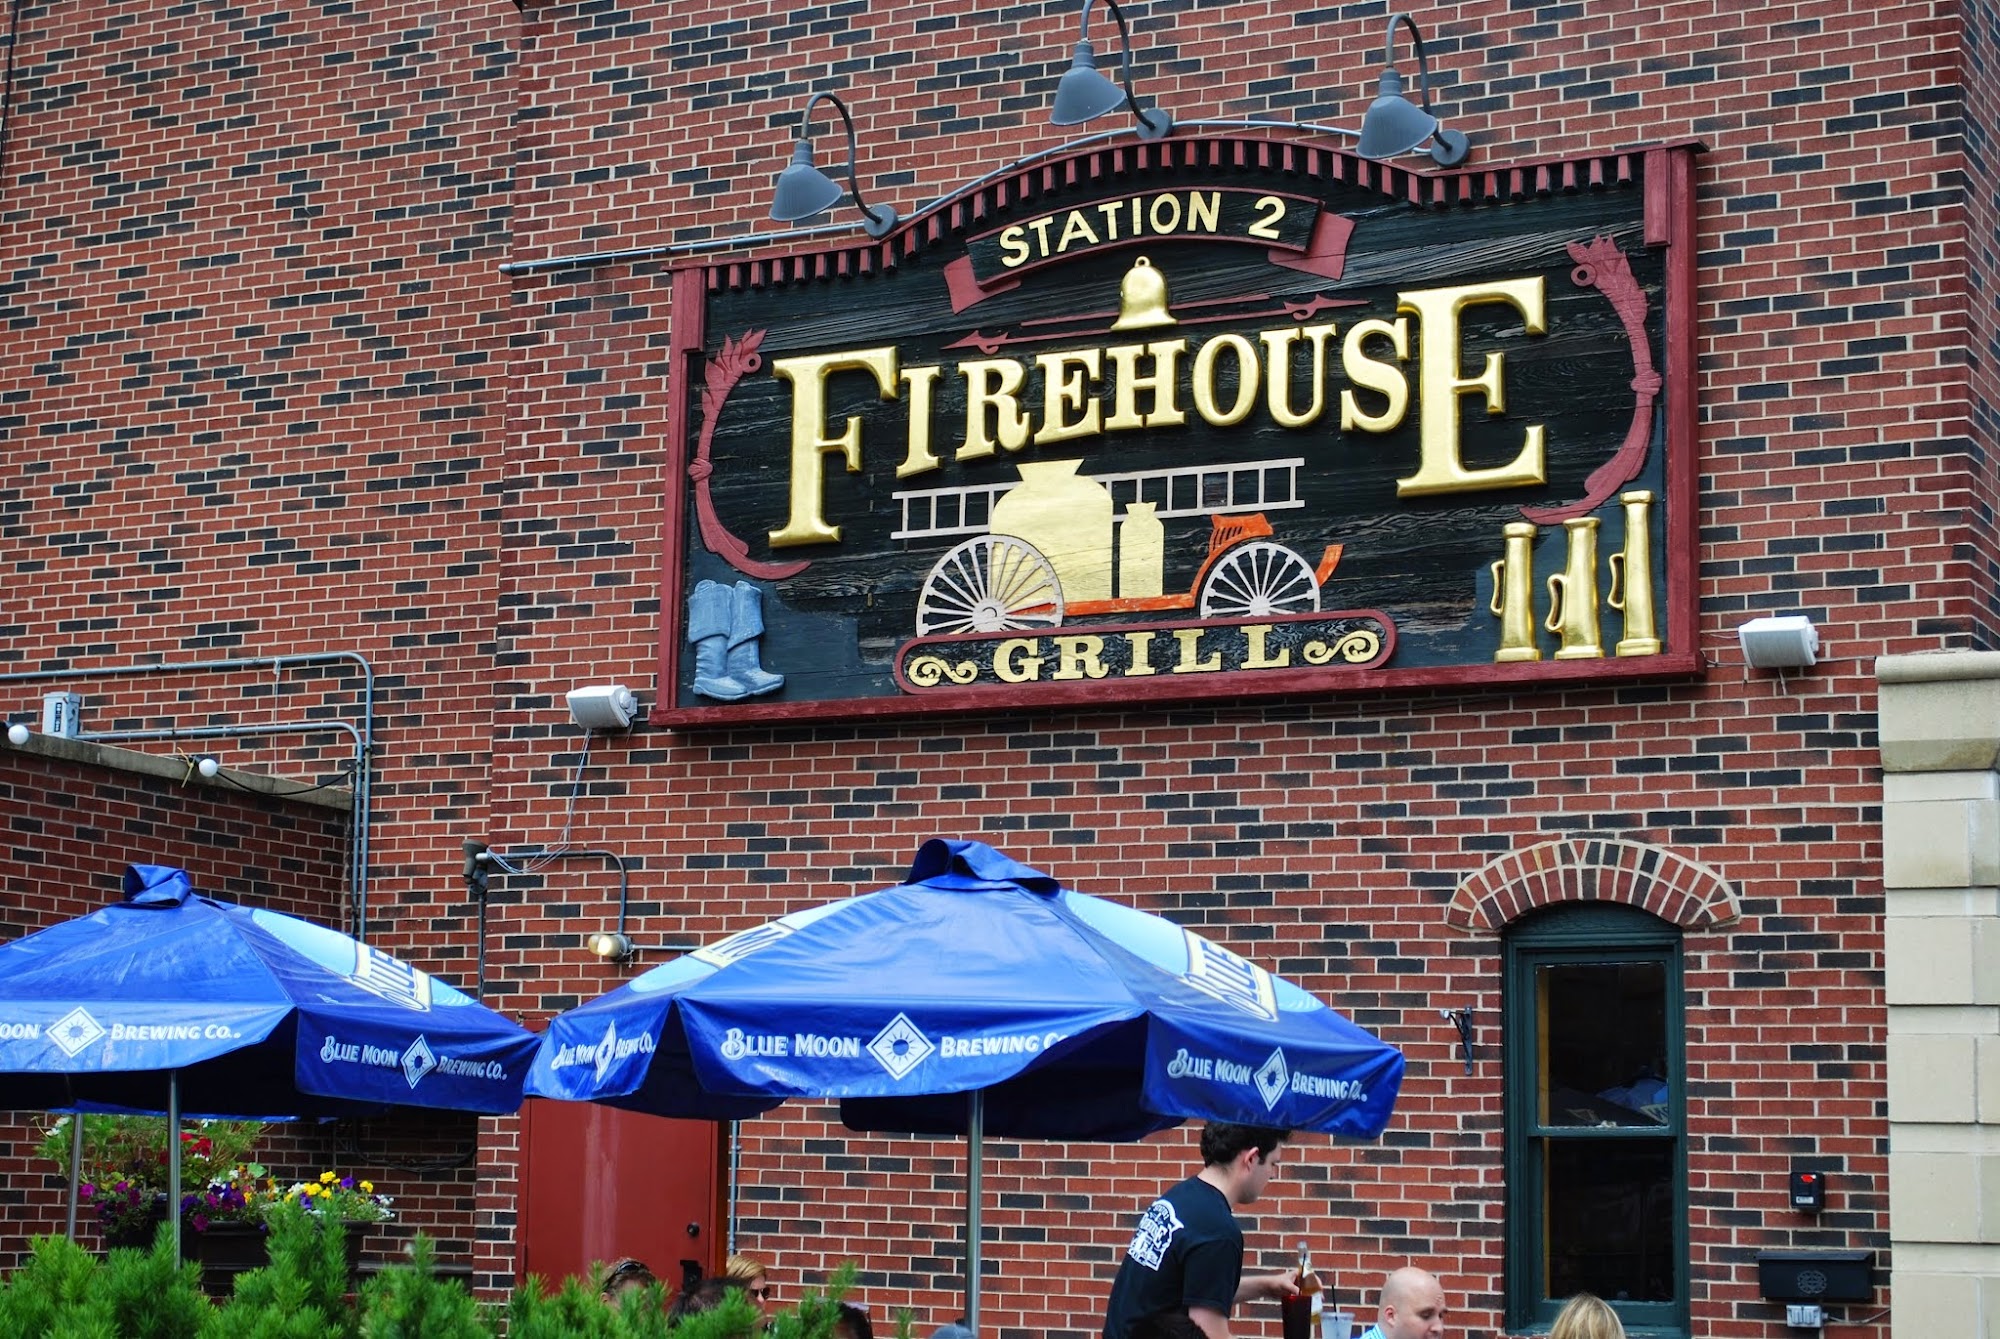 Firehouse Grill